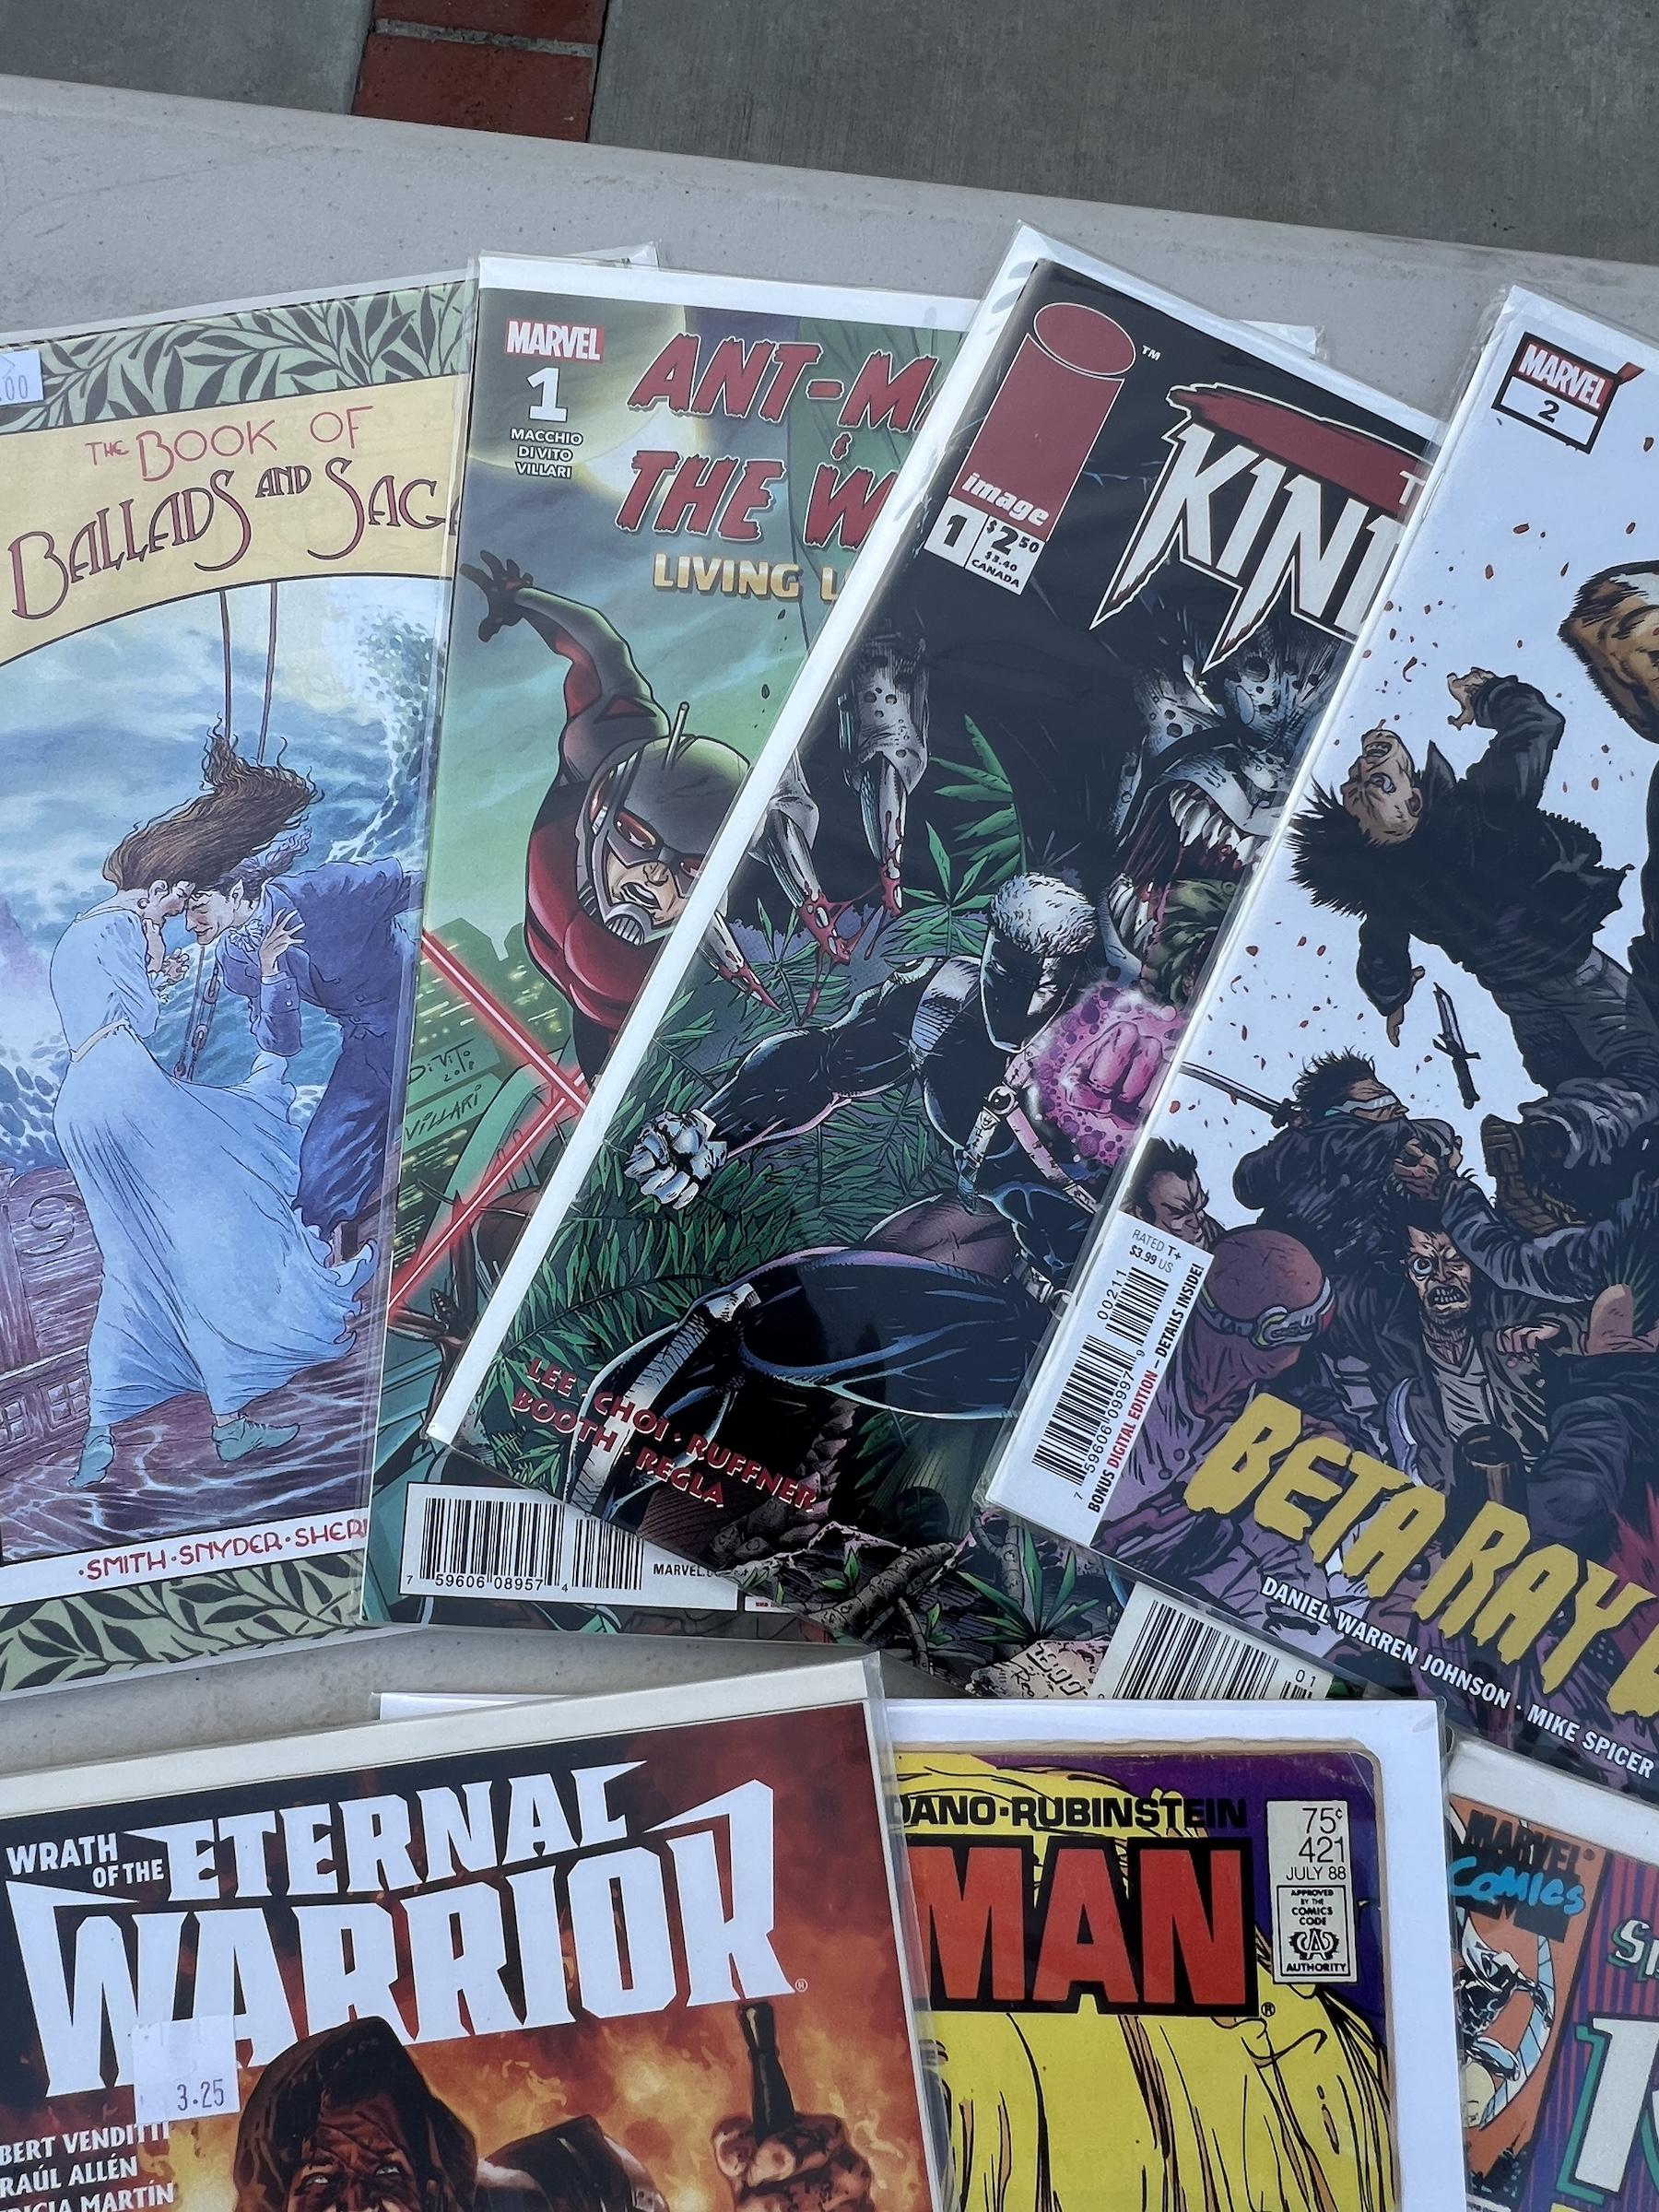 COMIC BOOK COLLECTION LOT 10 NF